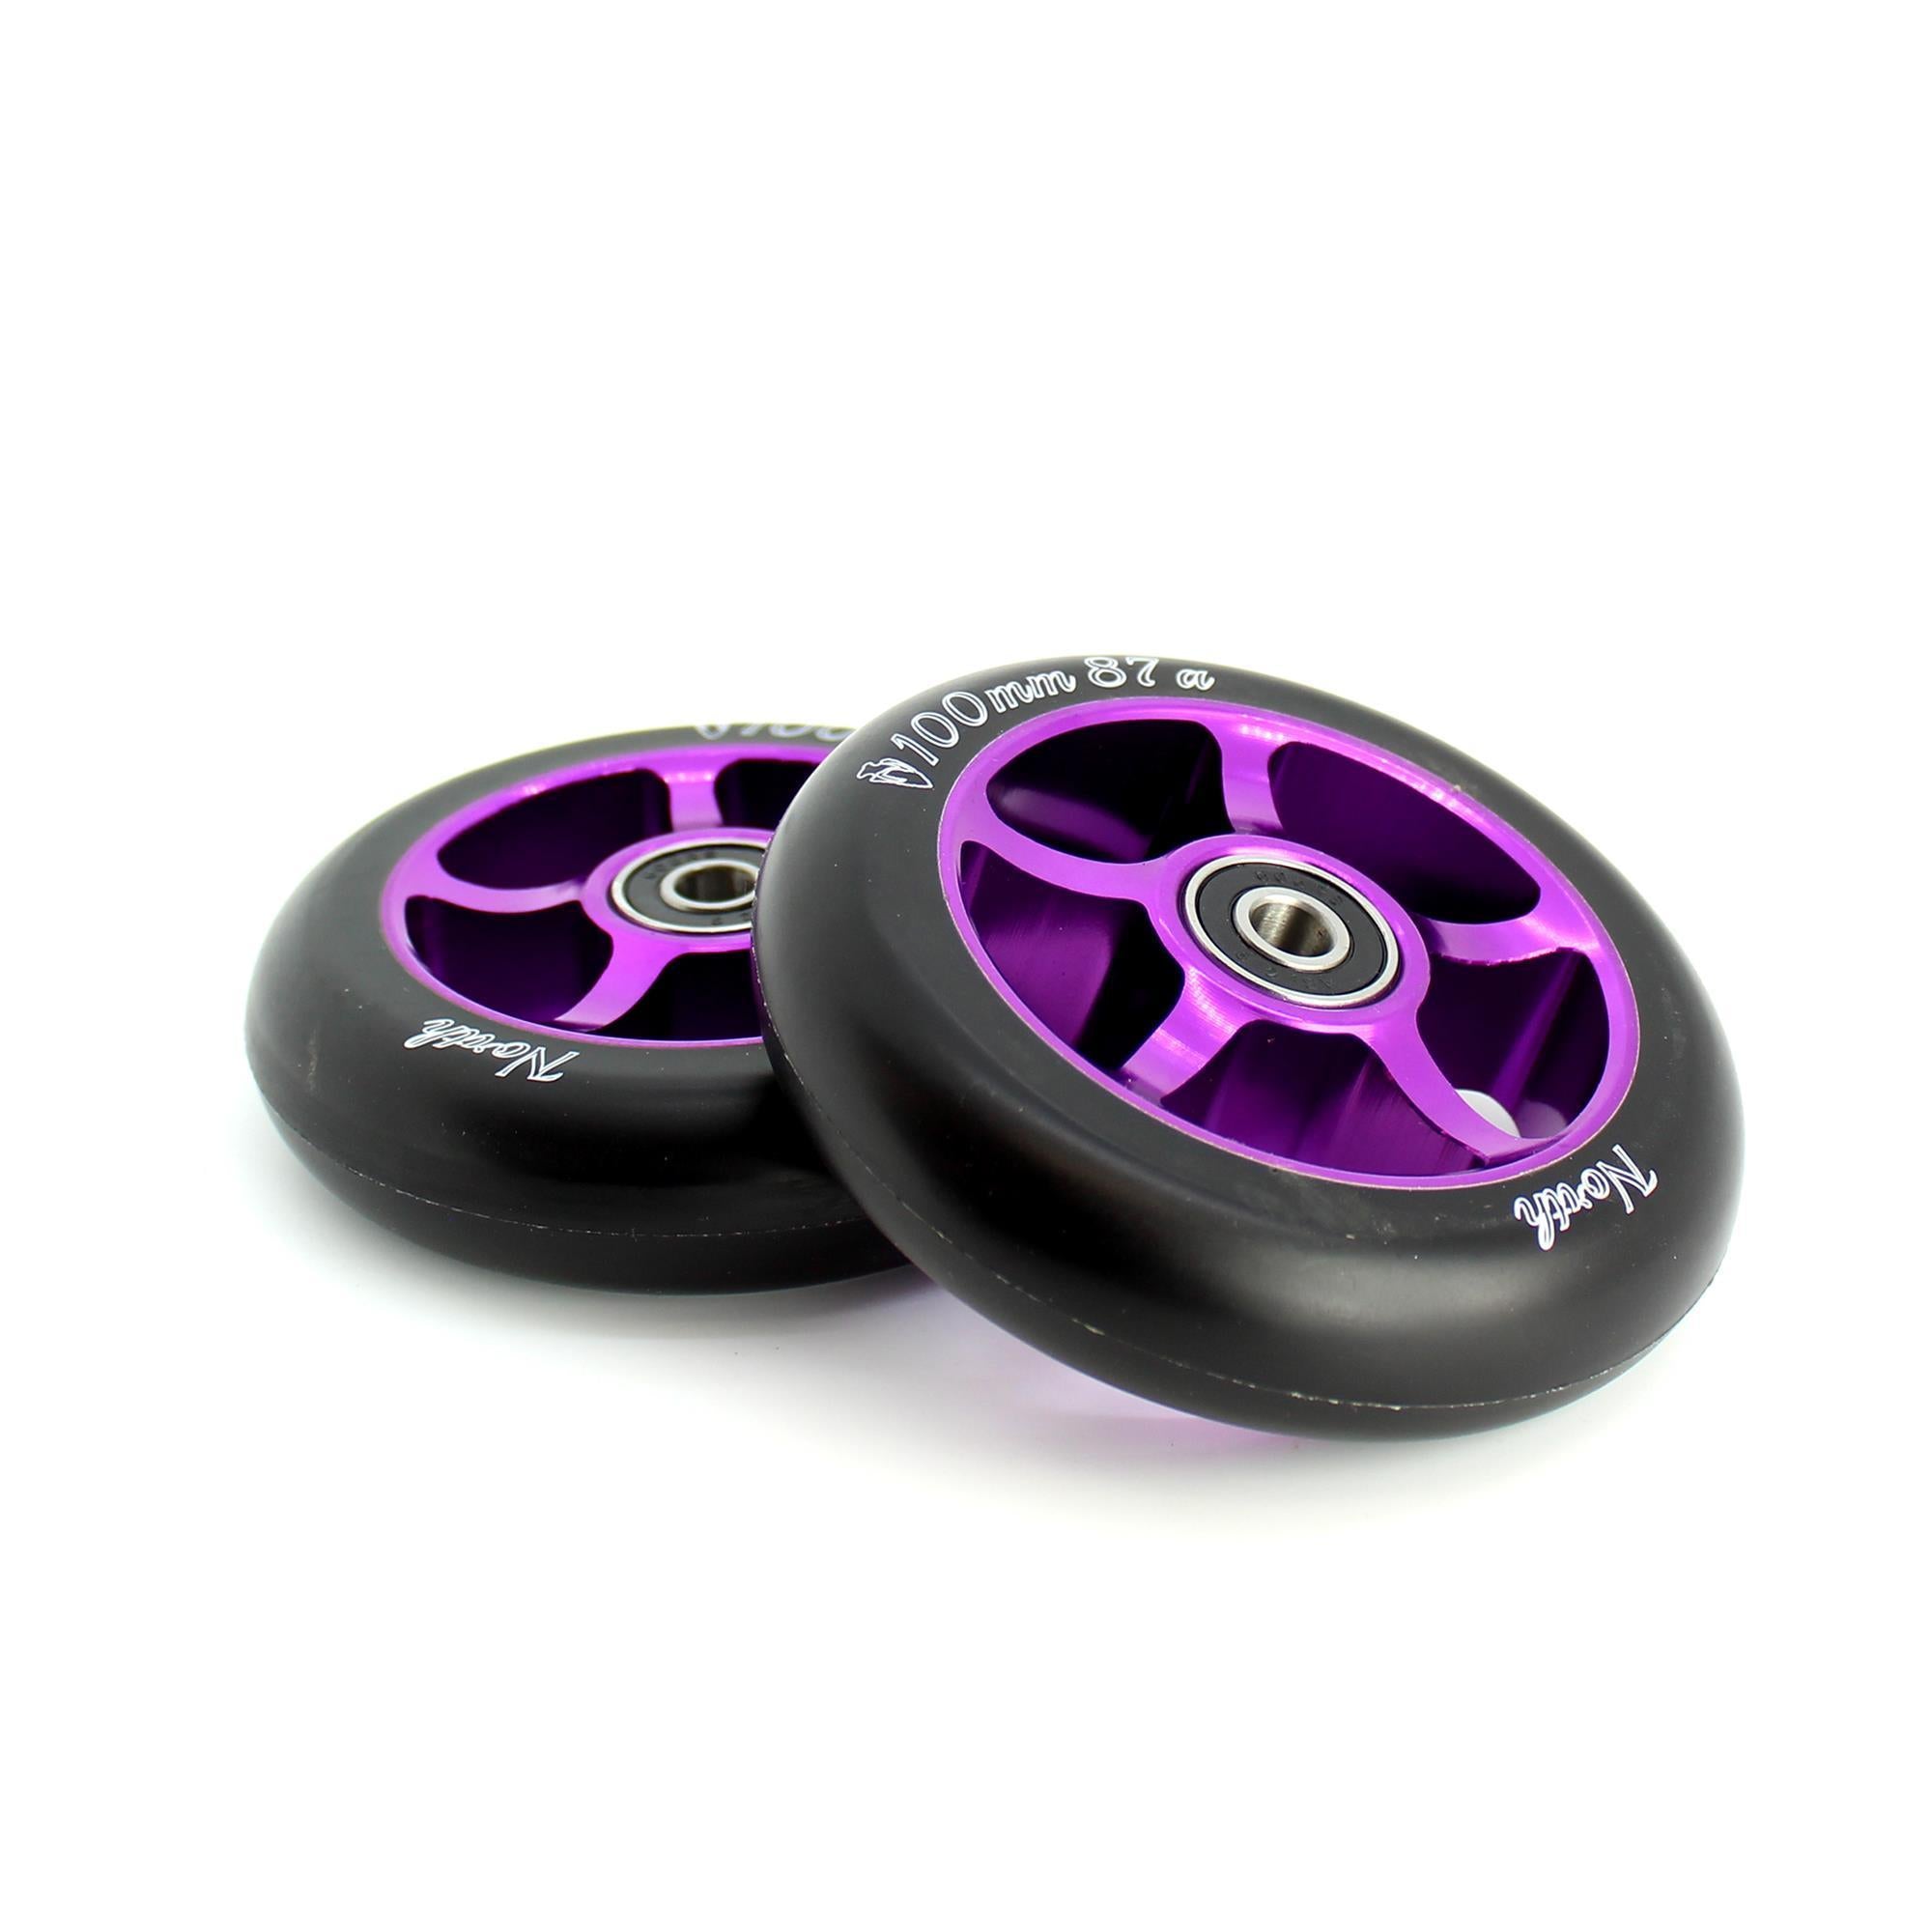 North Scooters 1st 87A 100mm (PAIR) - Scooter Wheels Purple